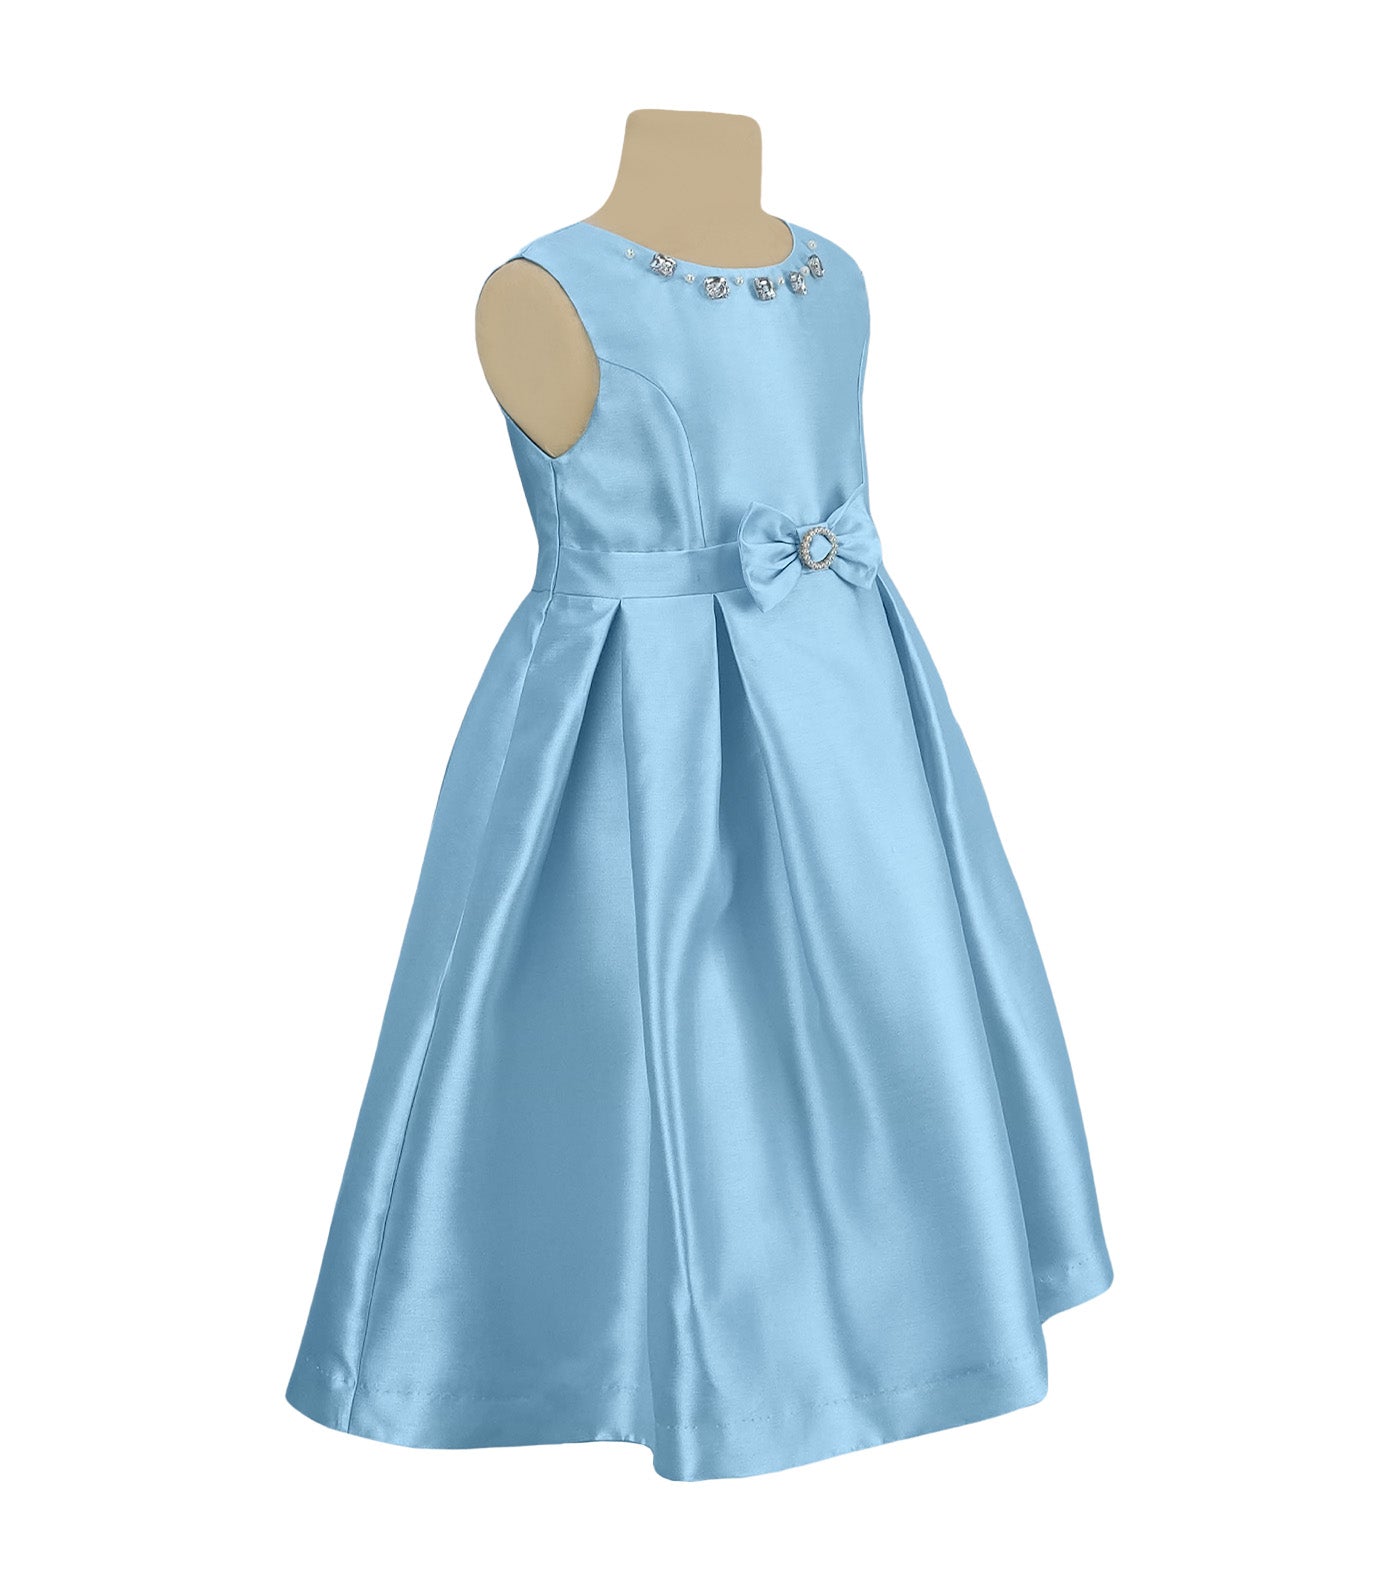 Thess Girls Bejewelled Neck & Buckle Detail Party Dress Light Blue